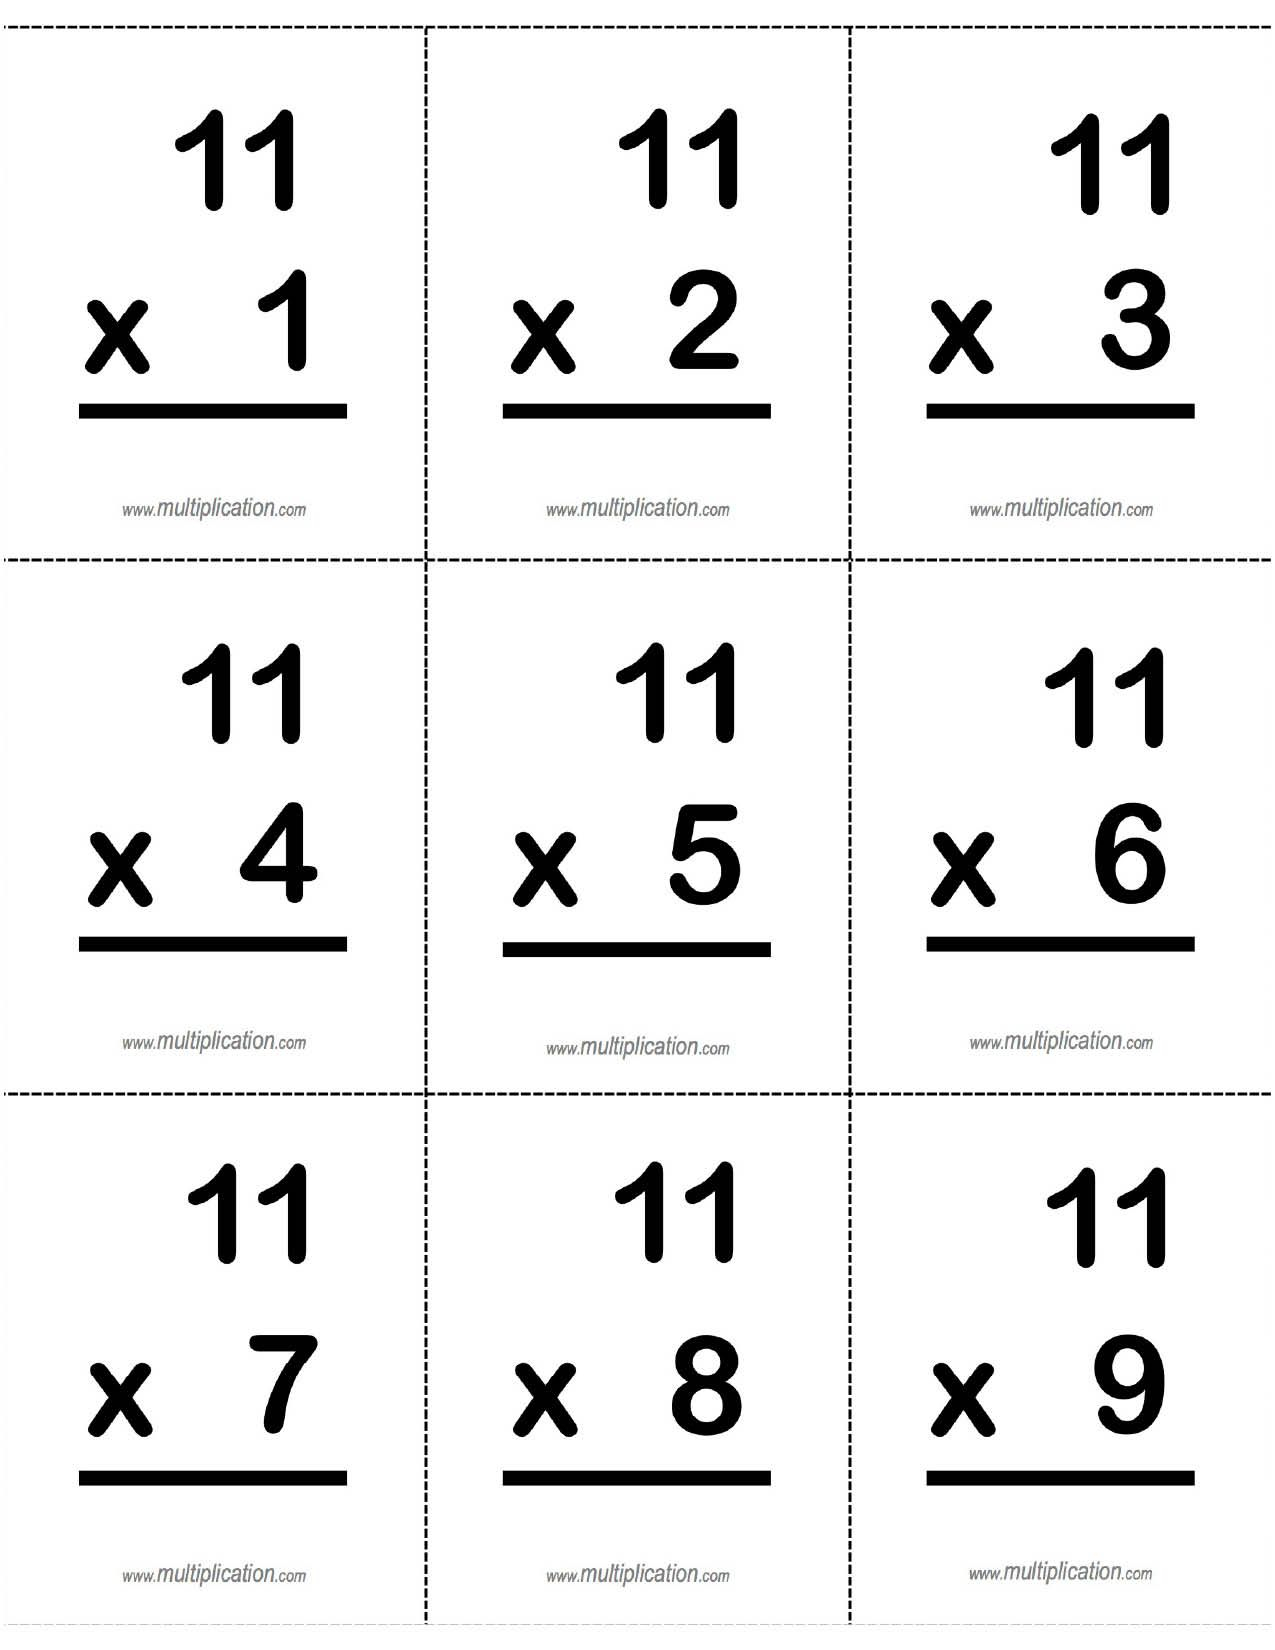 multiplication-flash-cards-printable-front-and-back-free-printable